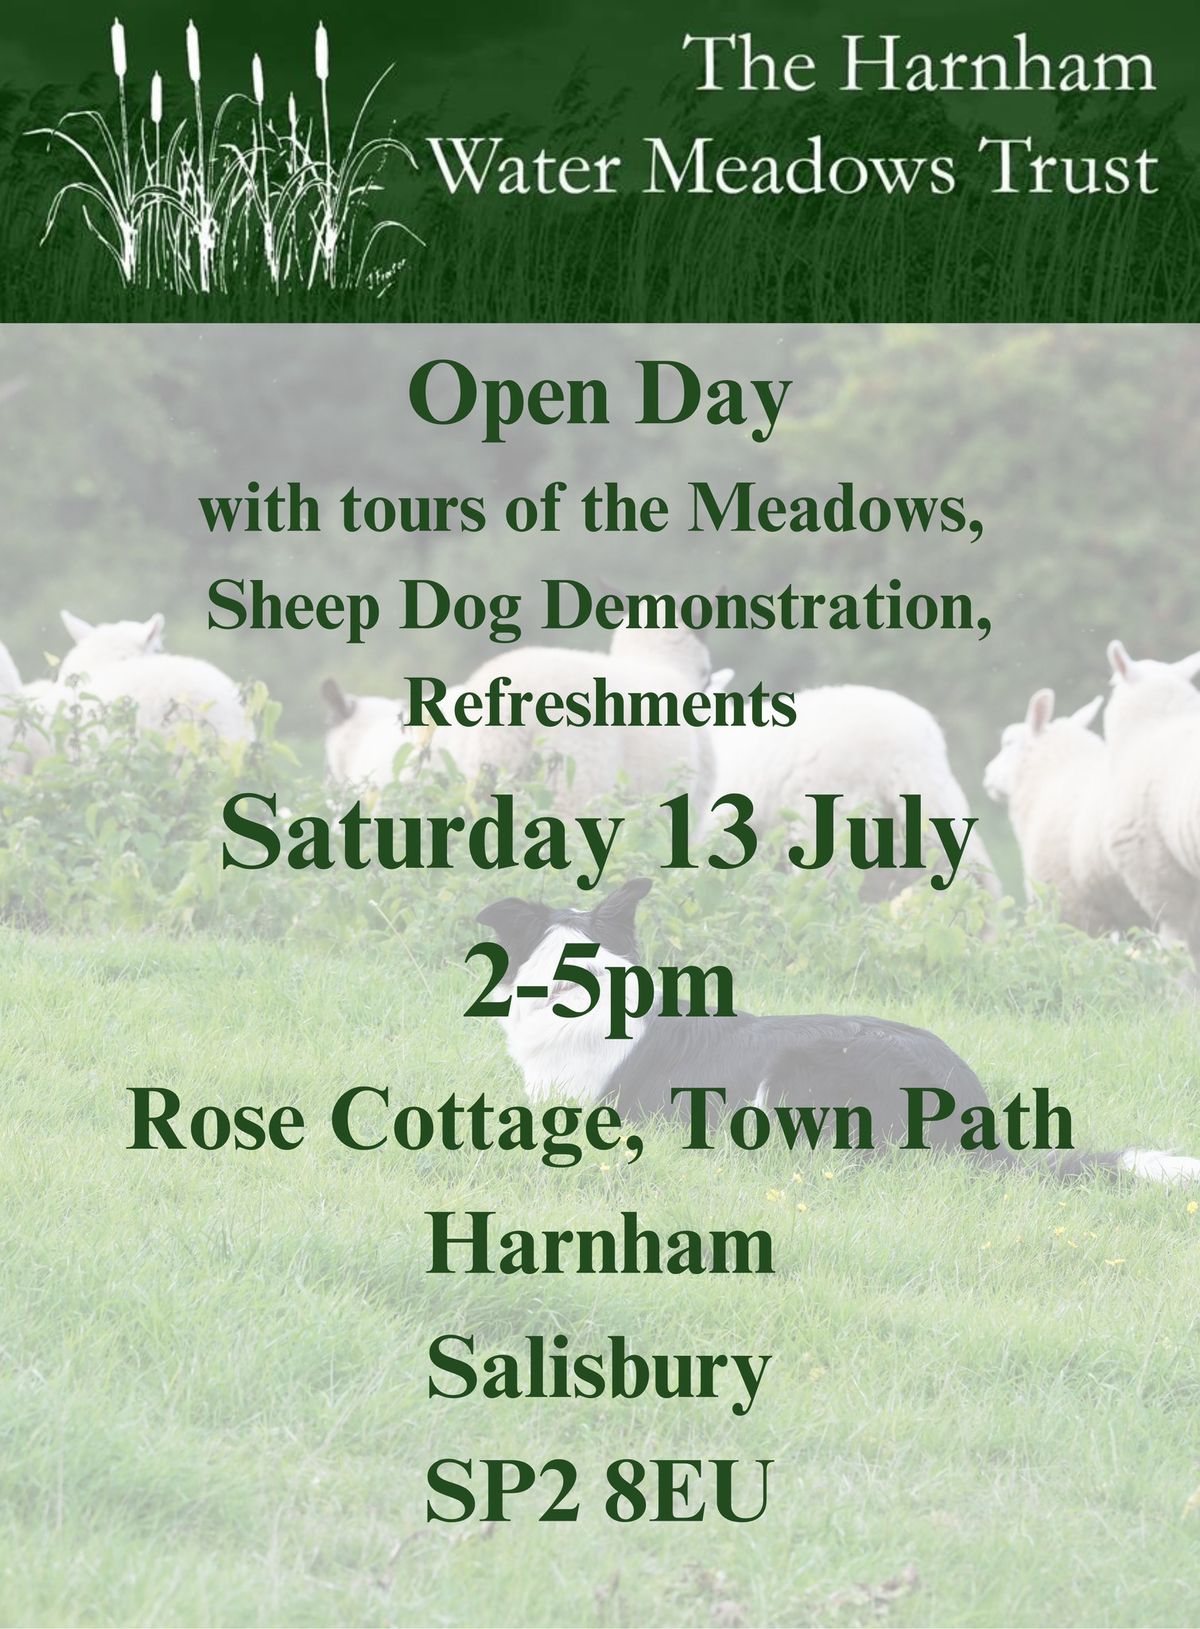 Open Day with tours of the Meadows, Sheep Dog Demonstration